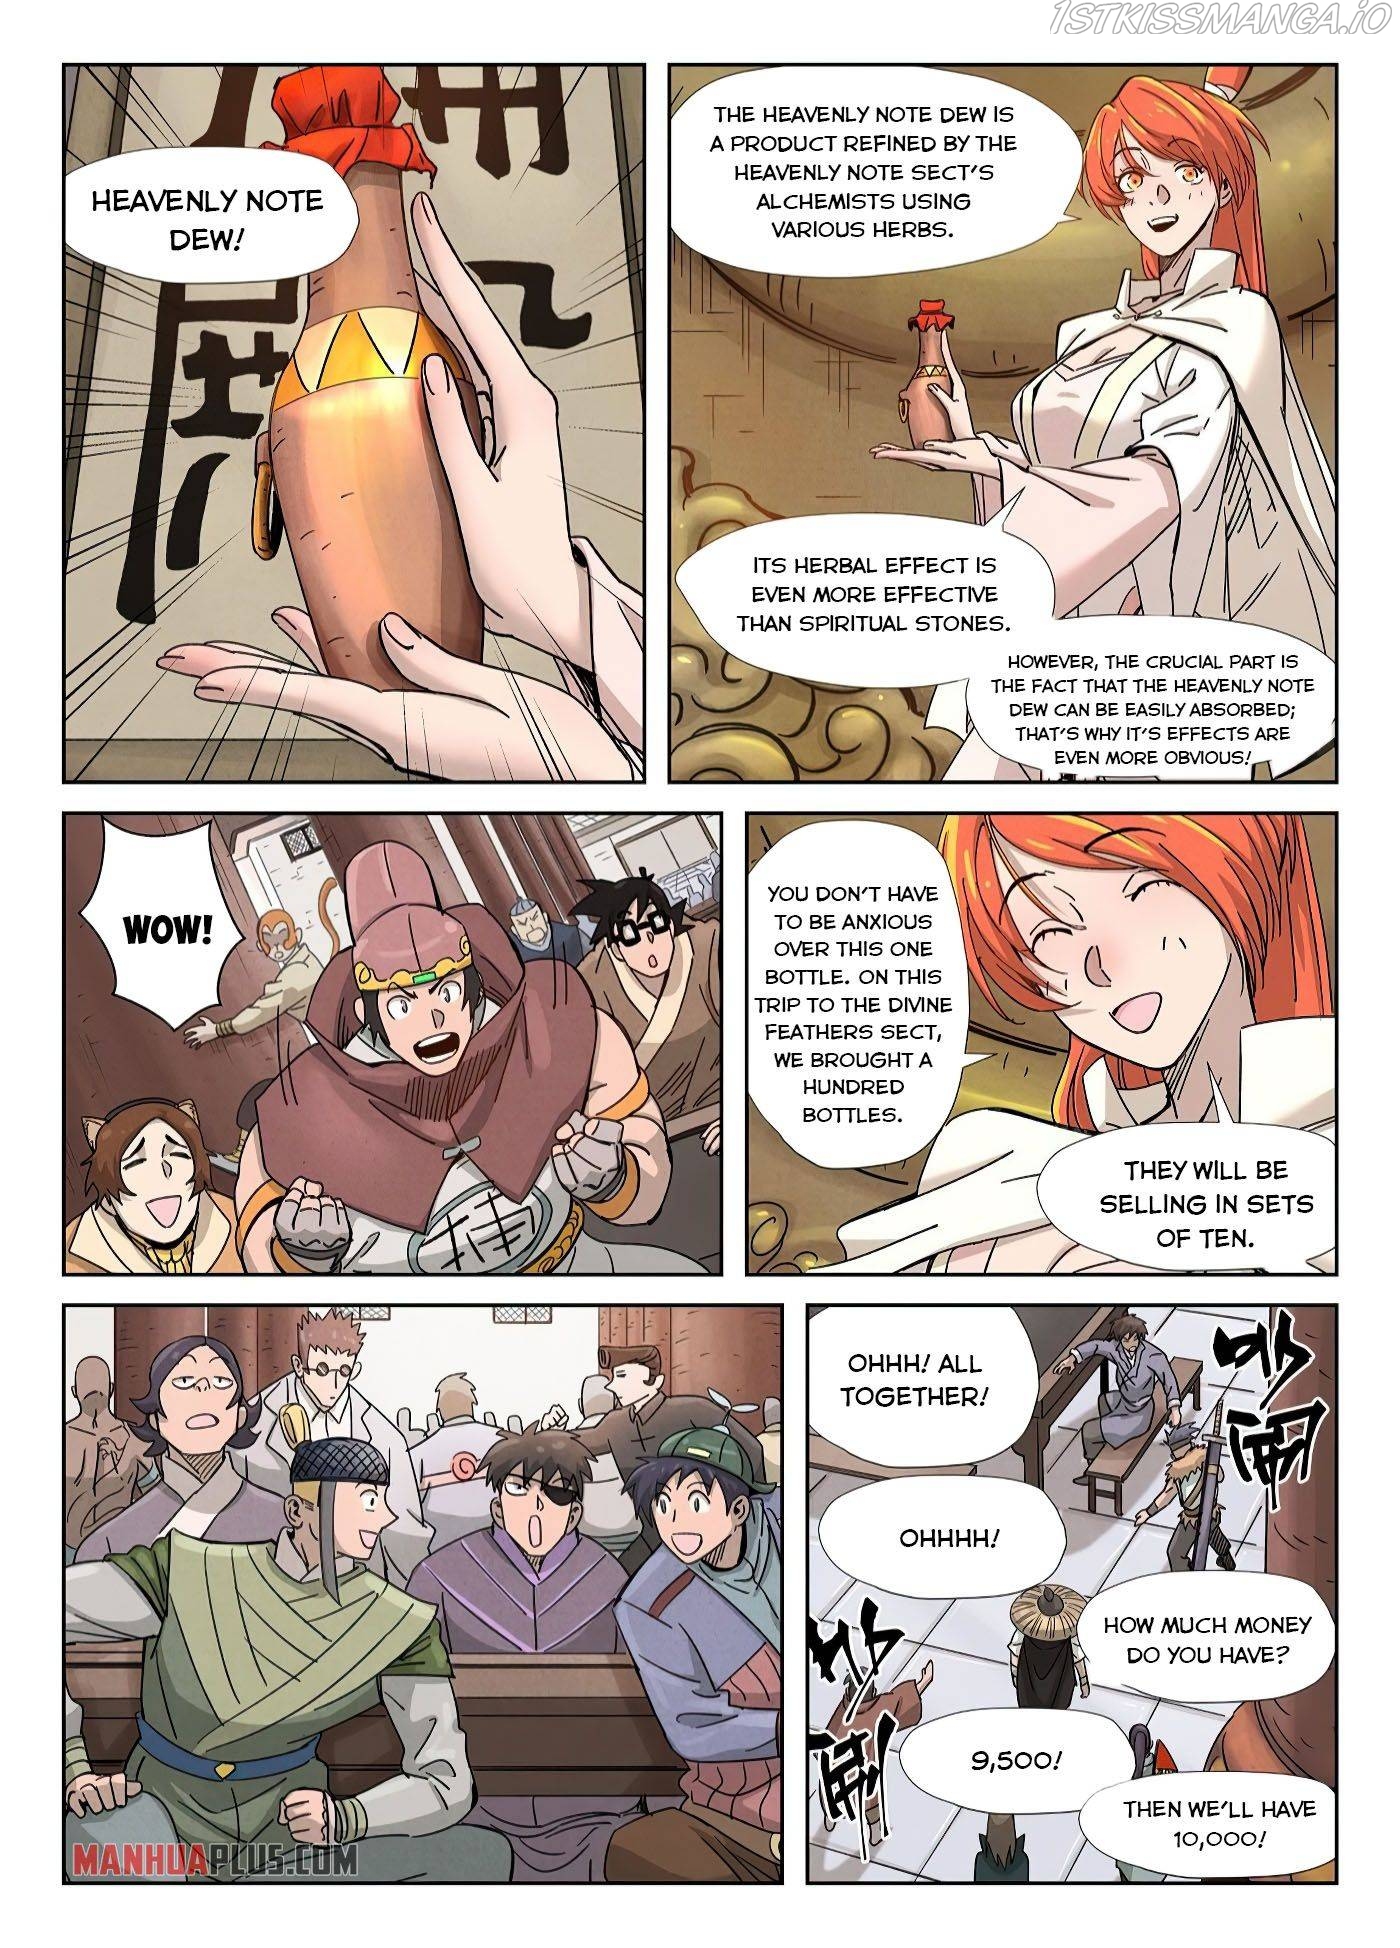 Tales of Demons and Gods Manhua Chapter 336.6 - Page 8